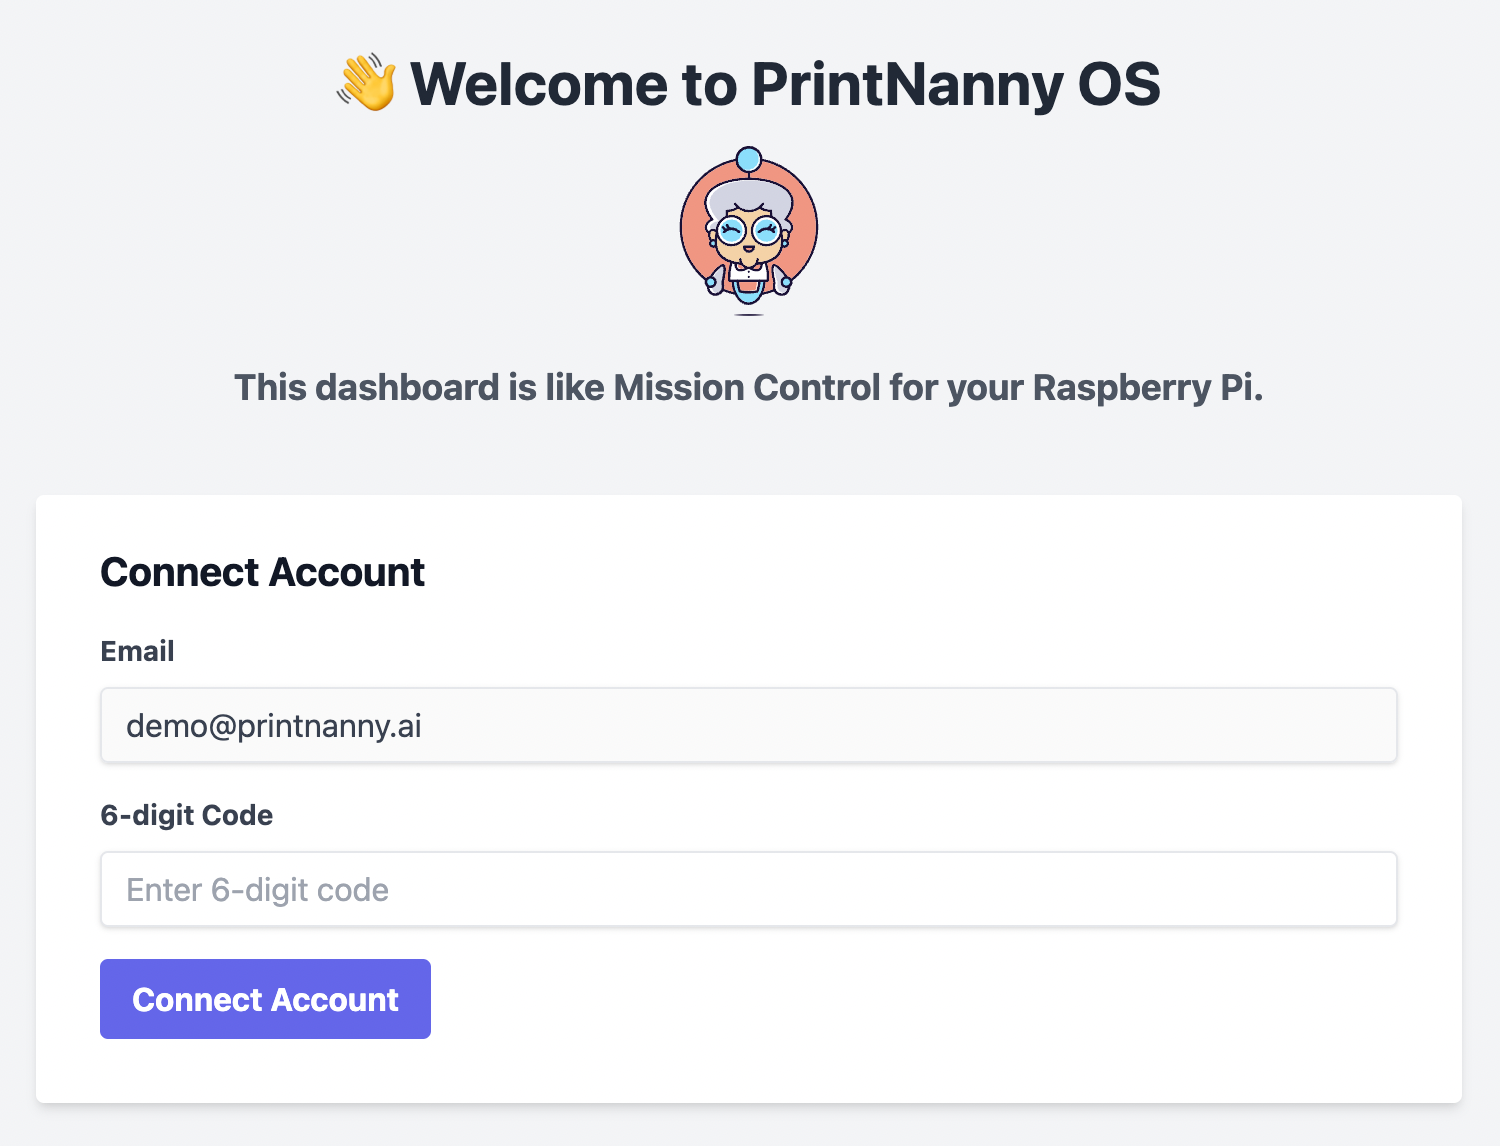 PrintNanny OS email 2fa prompt